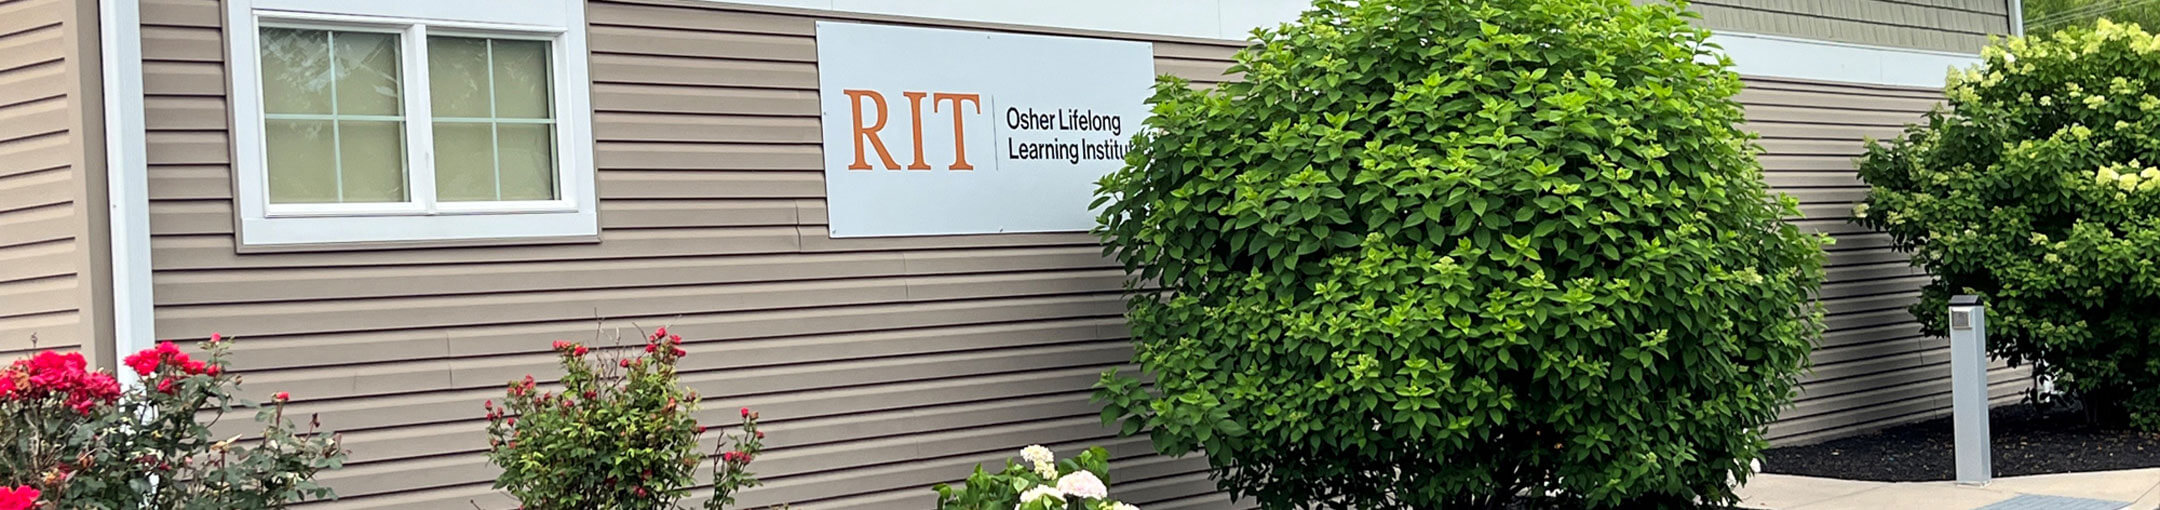 The side entrance of the Osher Lifelong Learning Institute.